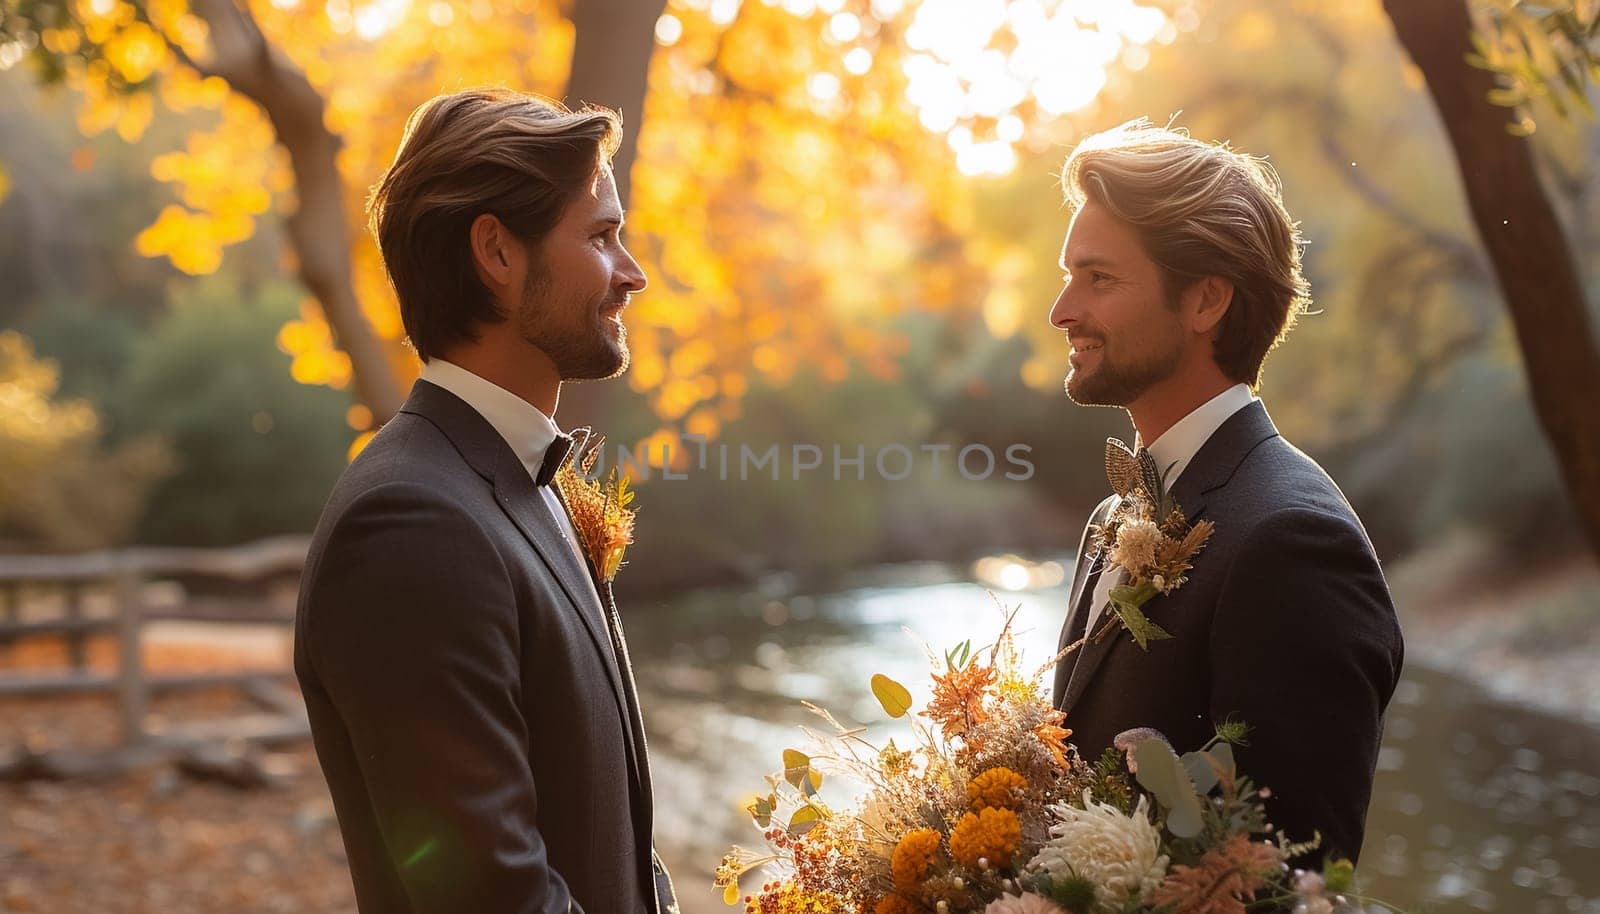 The wedding of two gay men by Nadtochiy